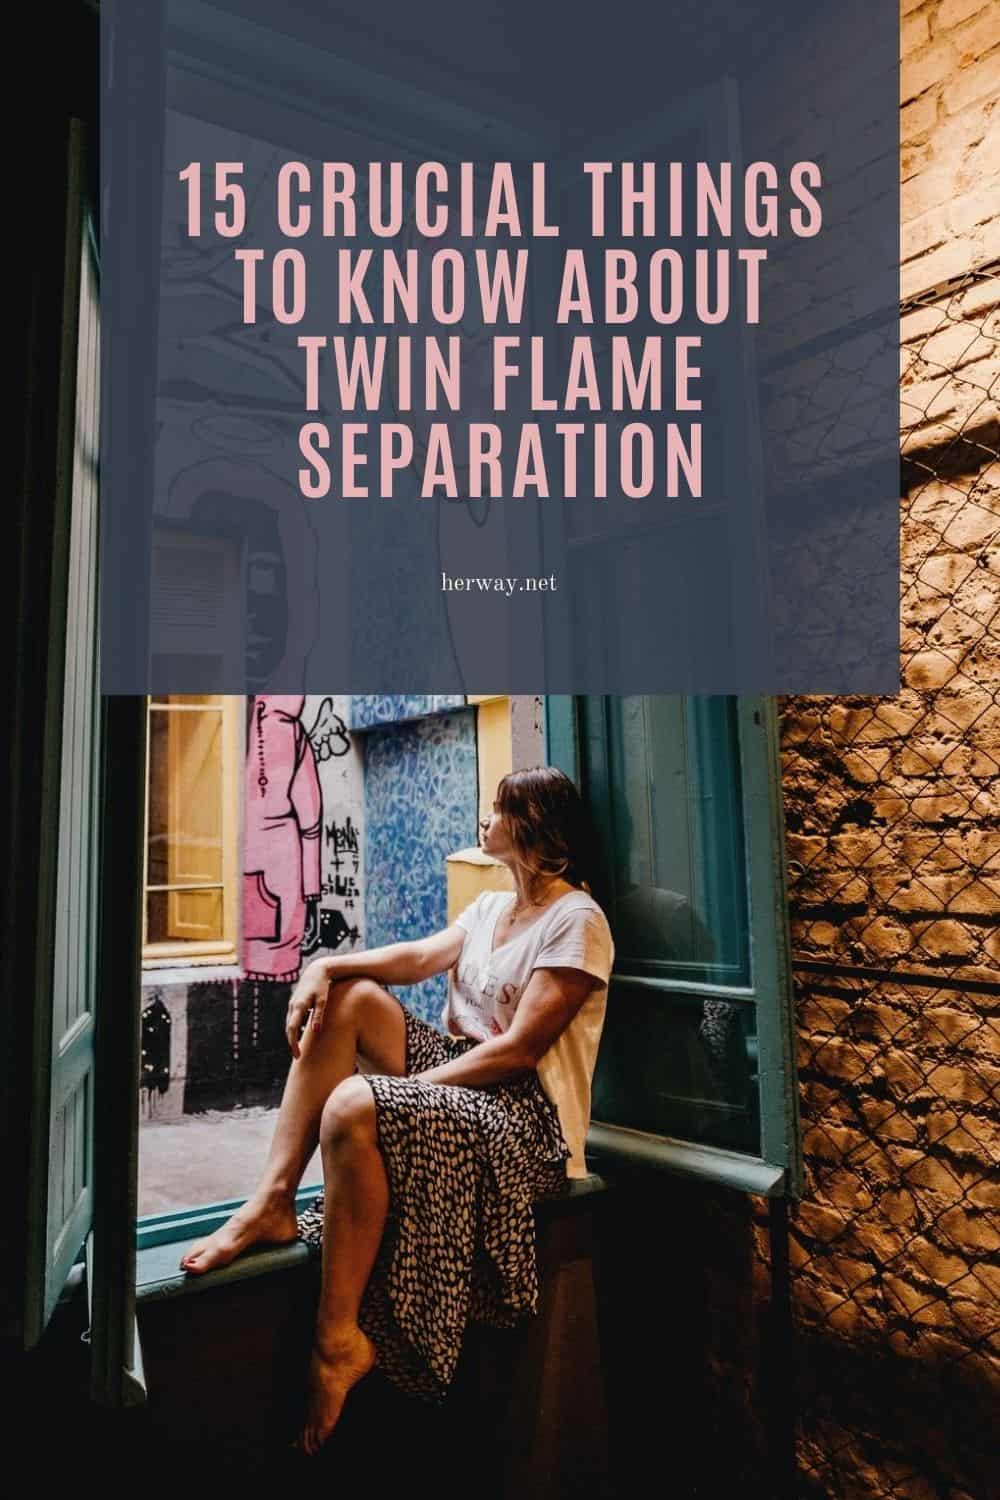 15 Crucial Things To Know About Twin Flame Separation